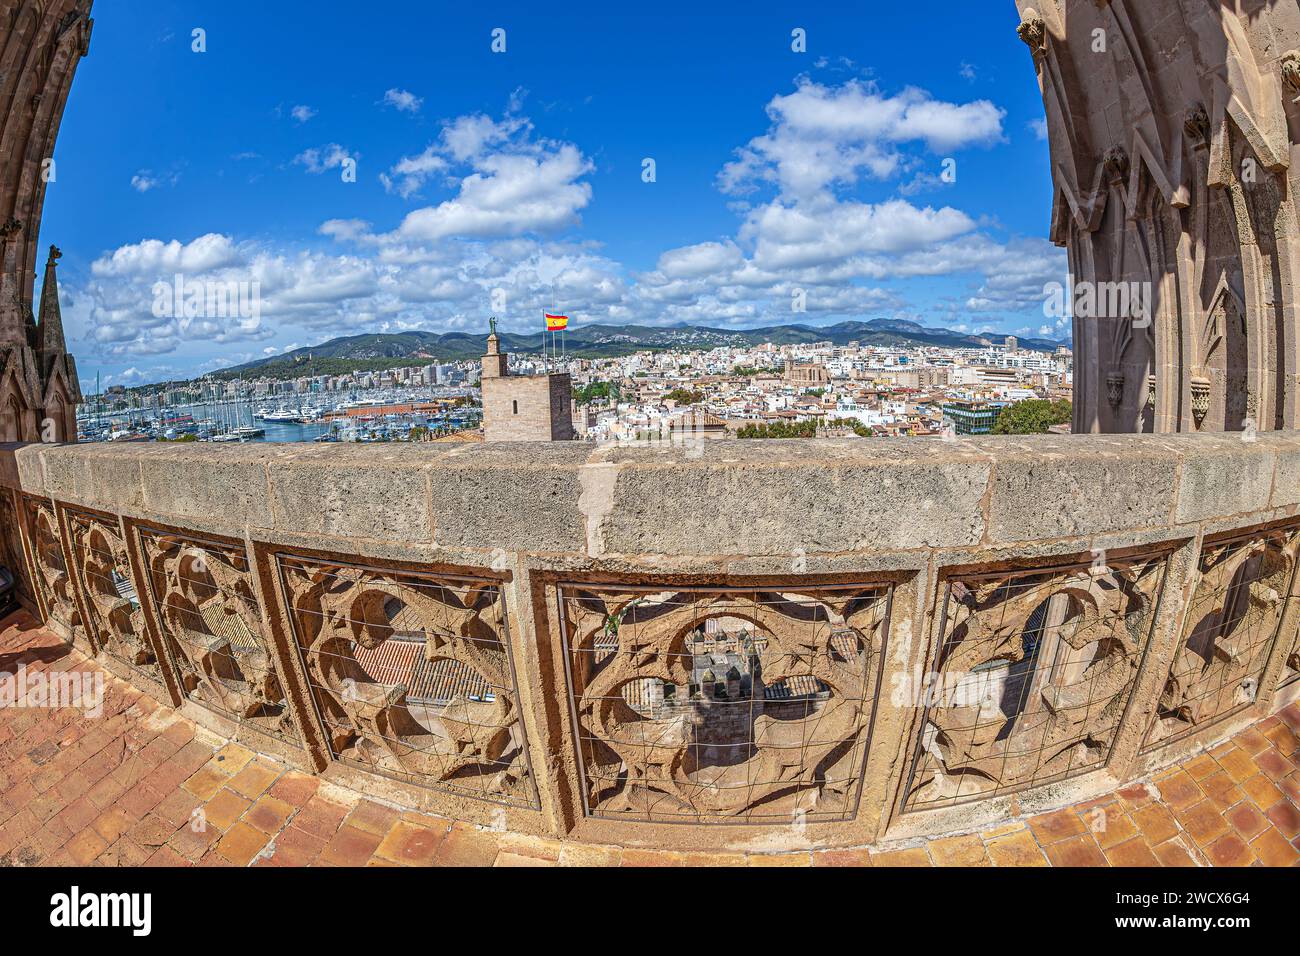 View from the terrace of the medieval Cathedral of Santa Maria of Palma of the roof of the Royal Palace of La Almudaina. Palma de Mallorca, Spain. Stock Photo